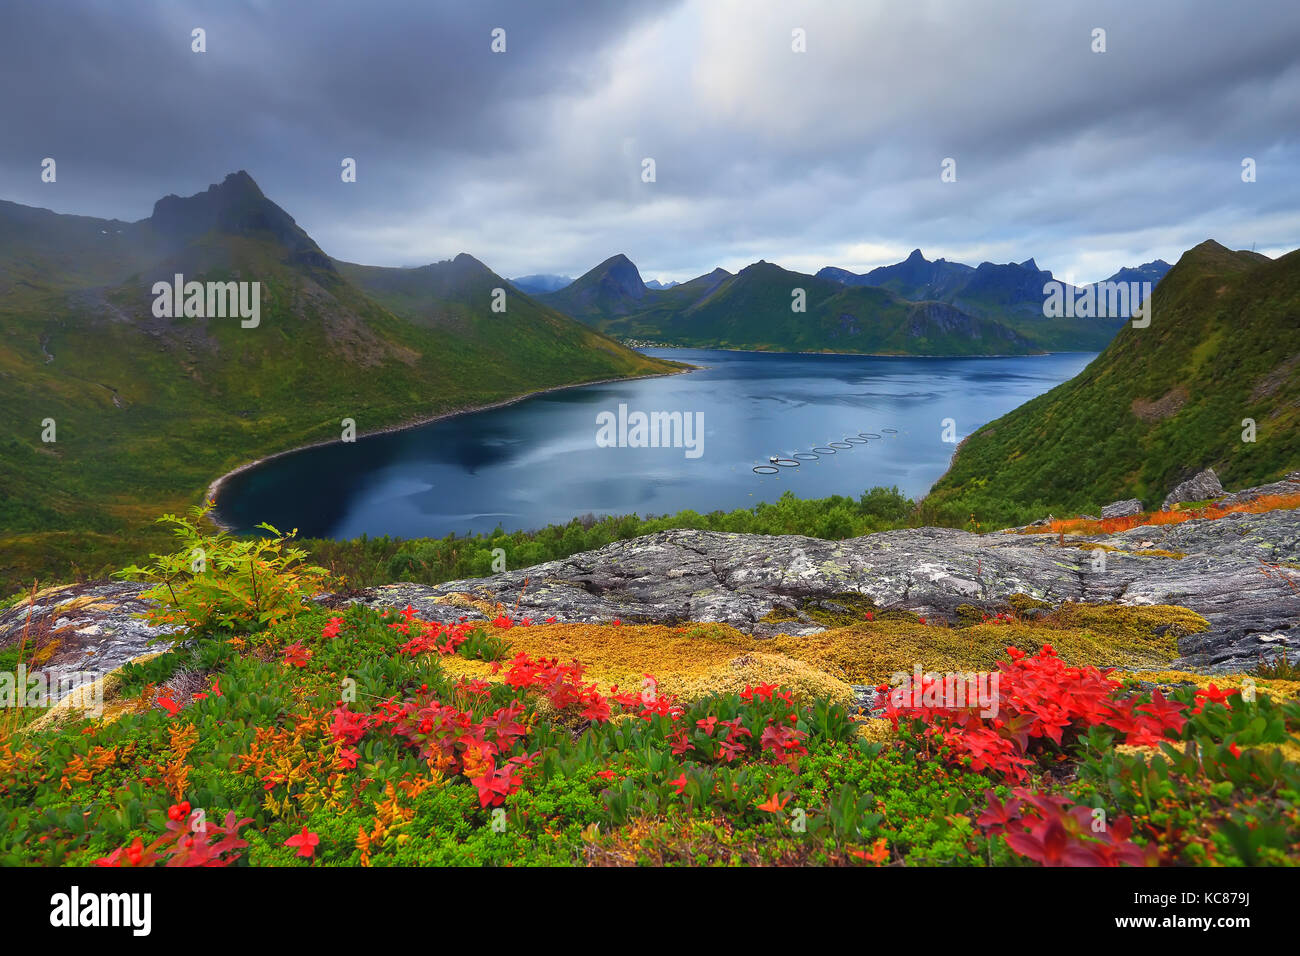 Autumn norway nature. Landscape of norwegian fjord on autumn day. Colorful foliage on hills to blue fjord. Stock Photo